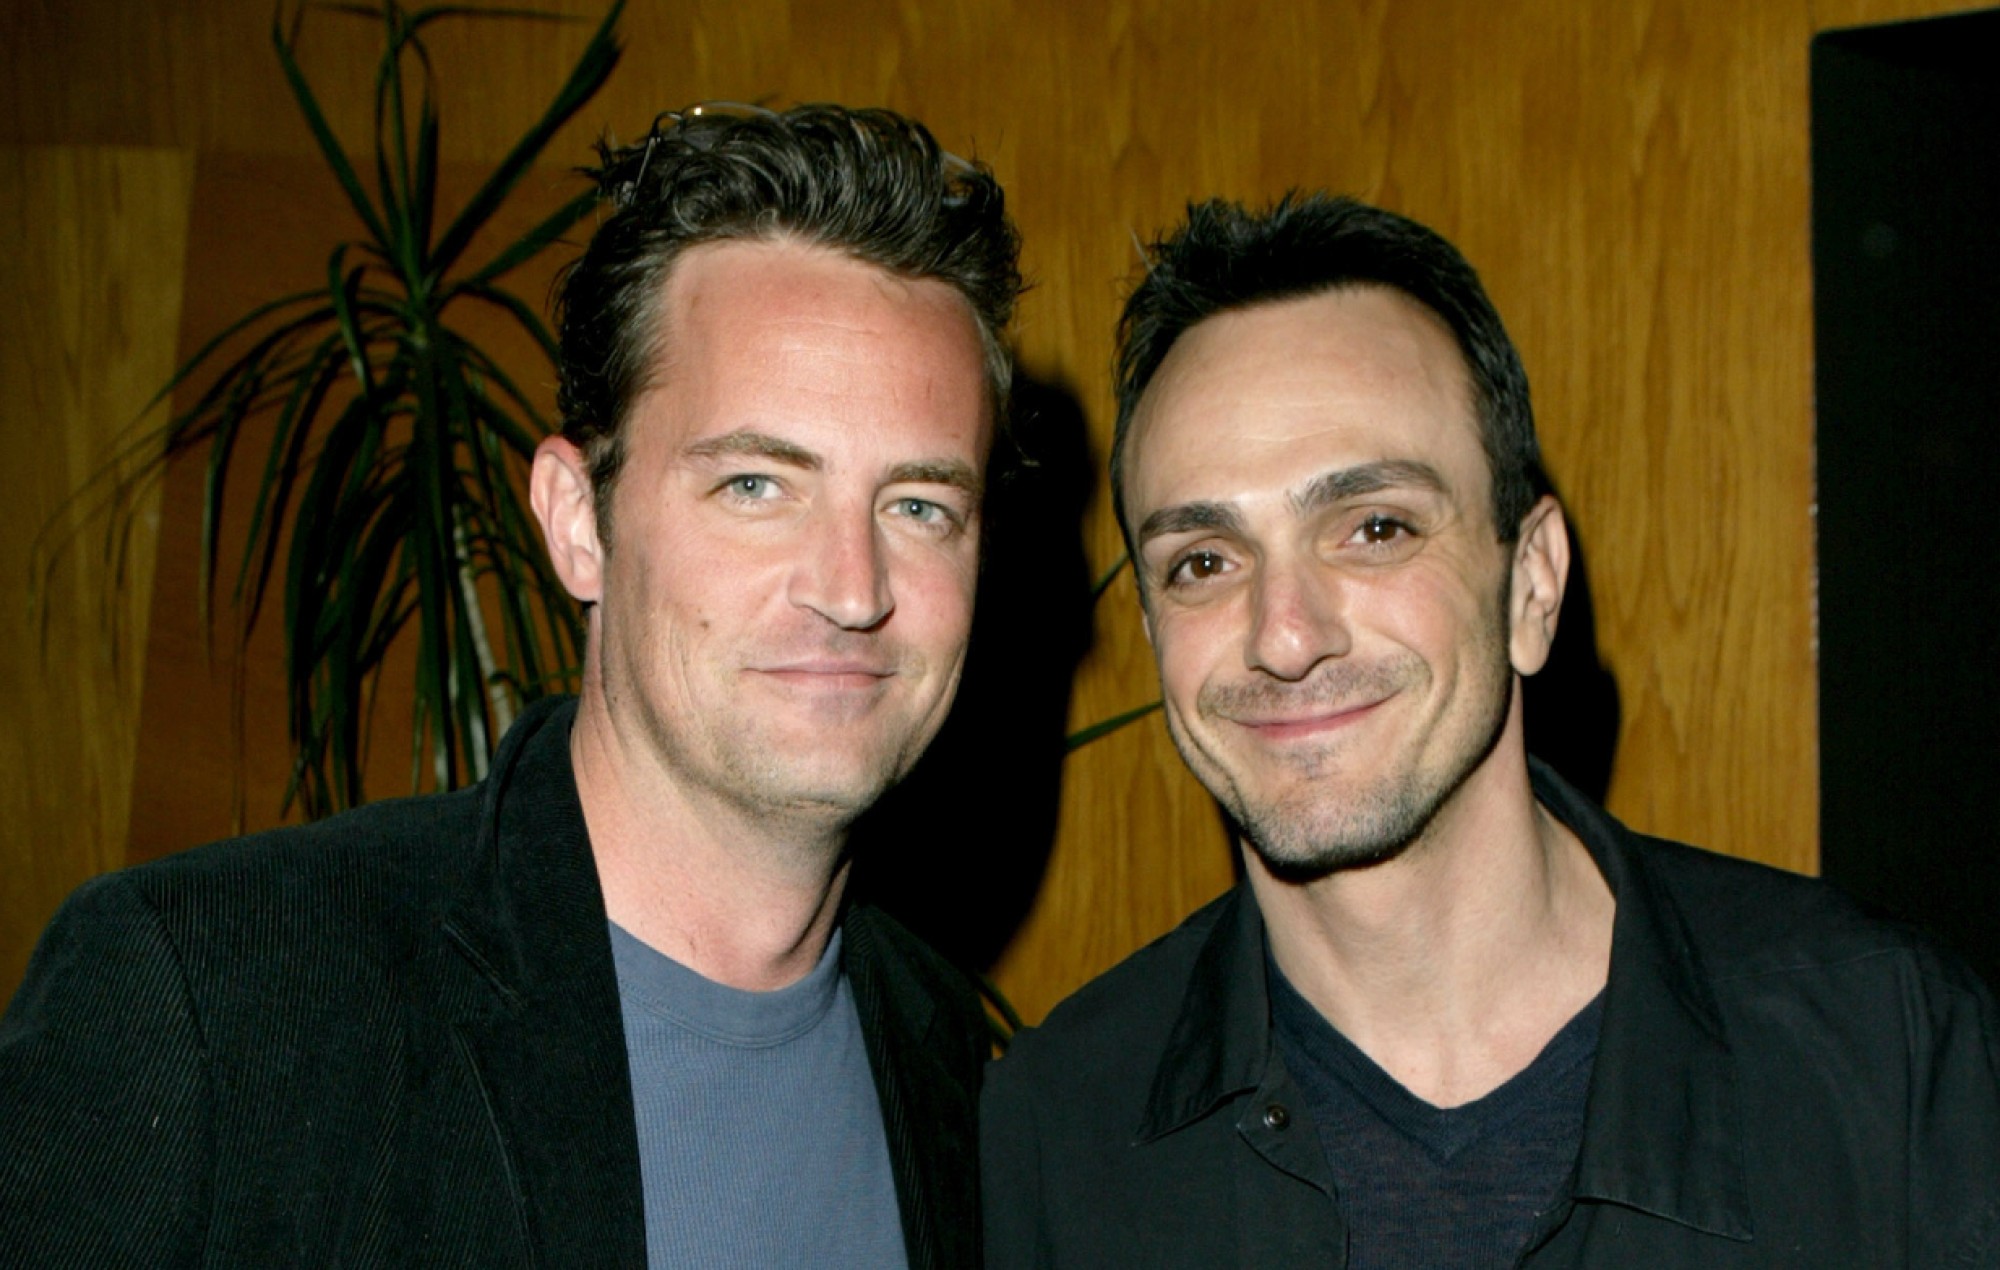 Hank Azaria shares how Matthew Perry helped him get sober: “I leaned on him a lot”